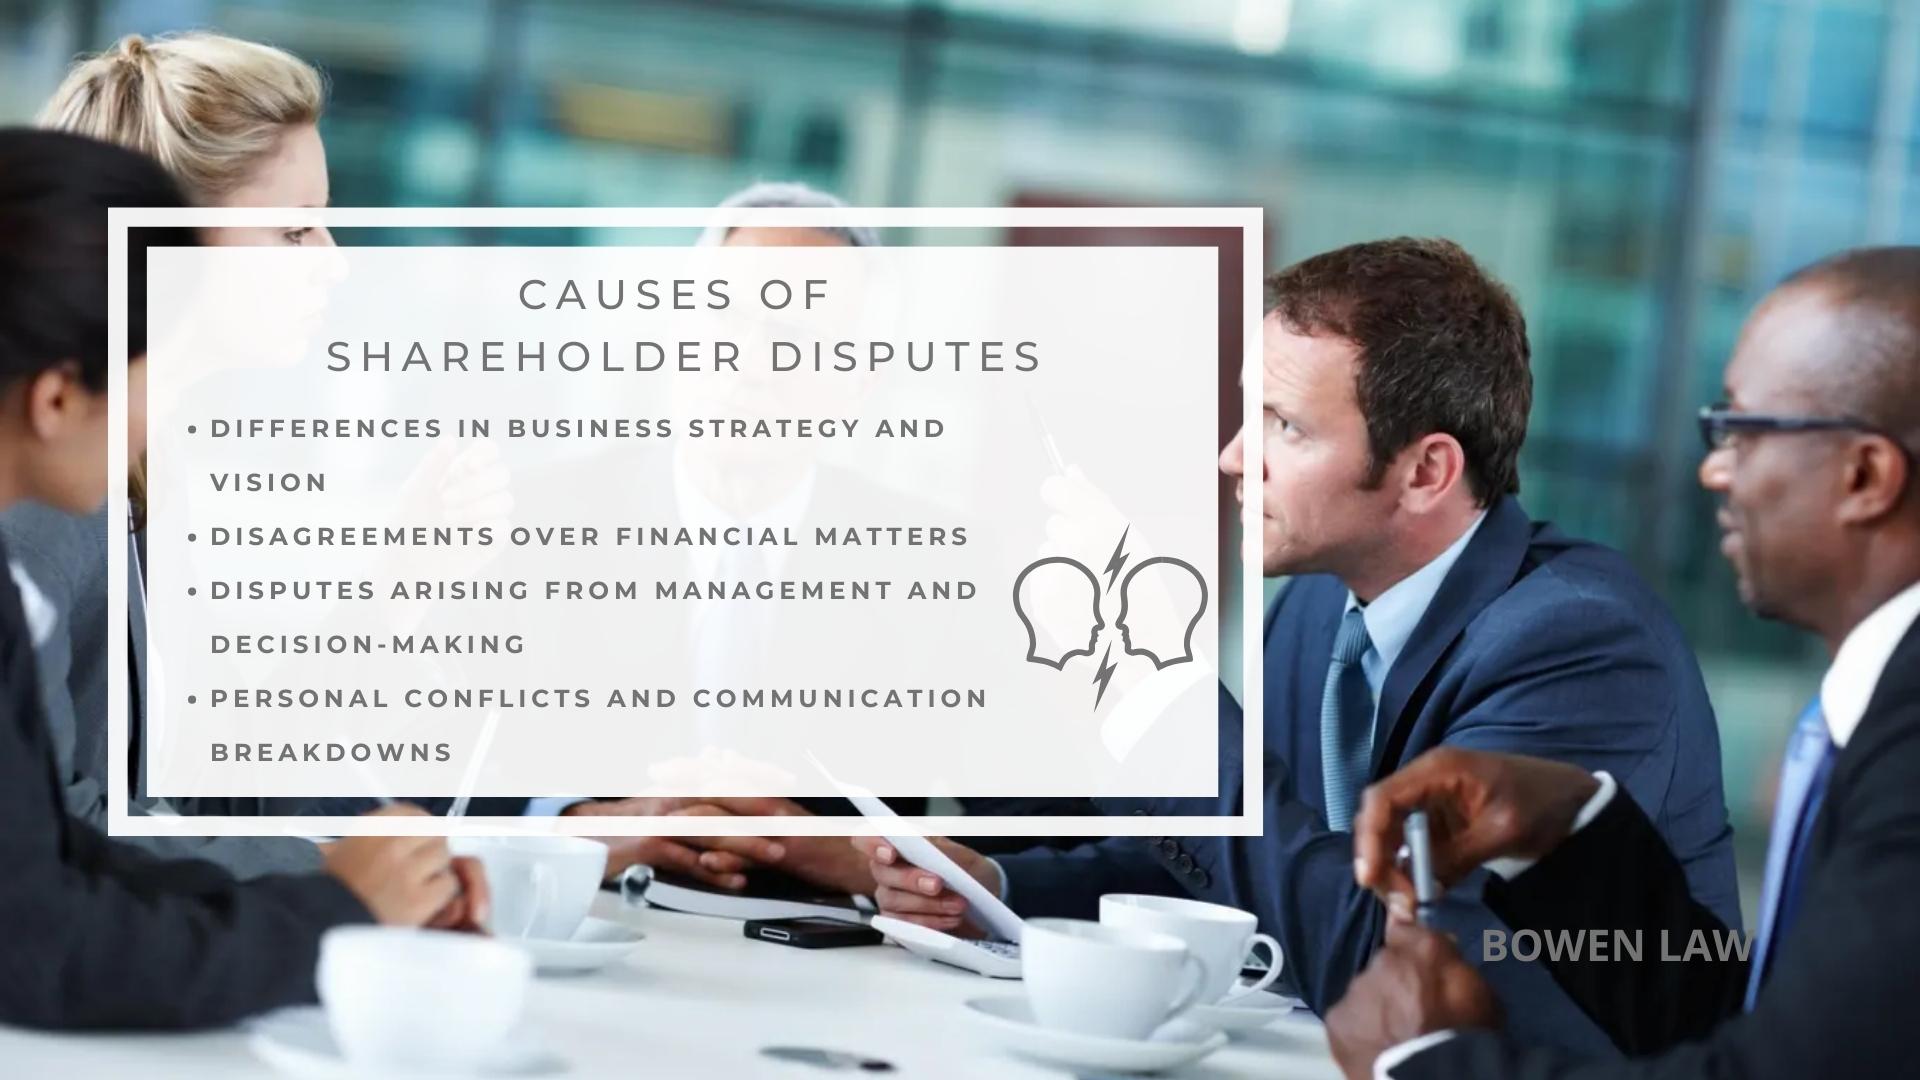 Infographic image of causes of shareholder disputes